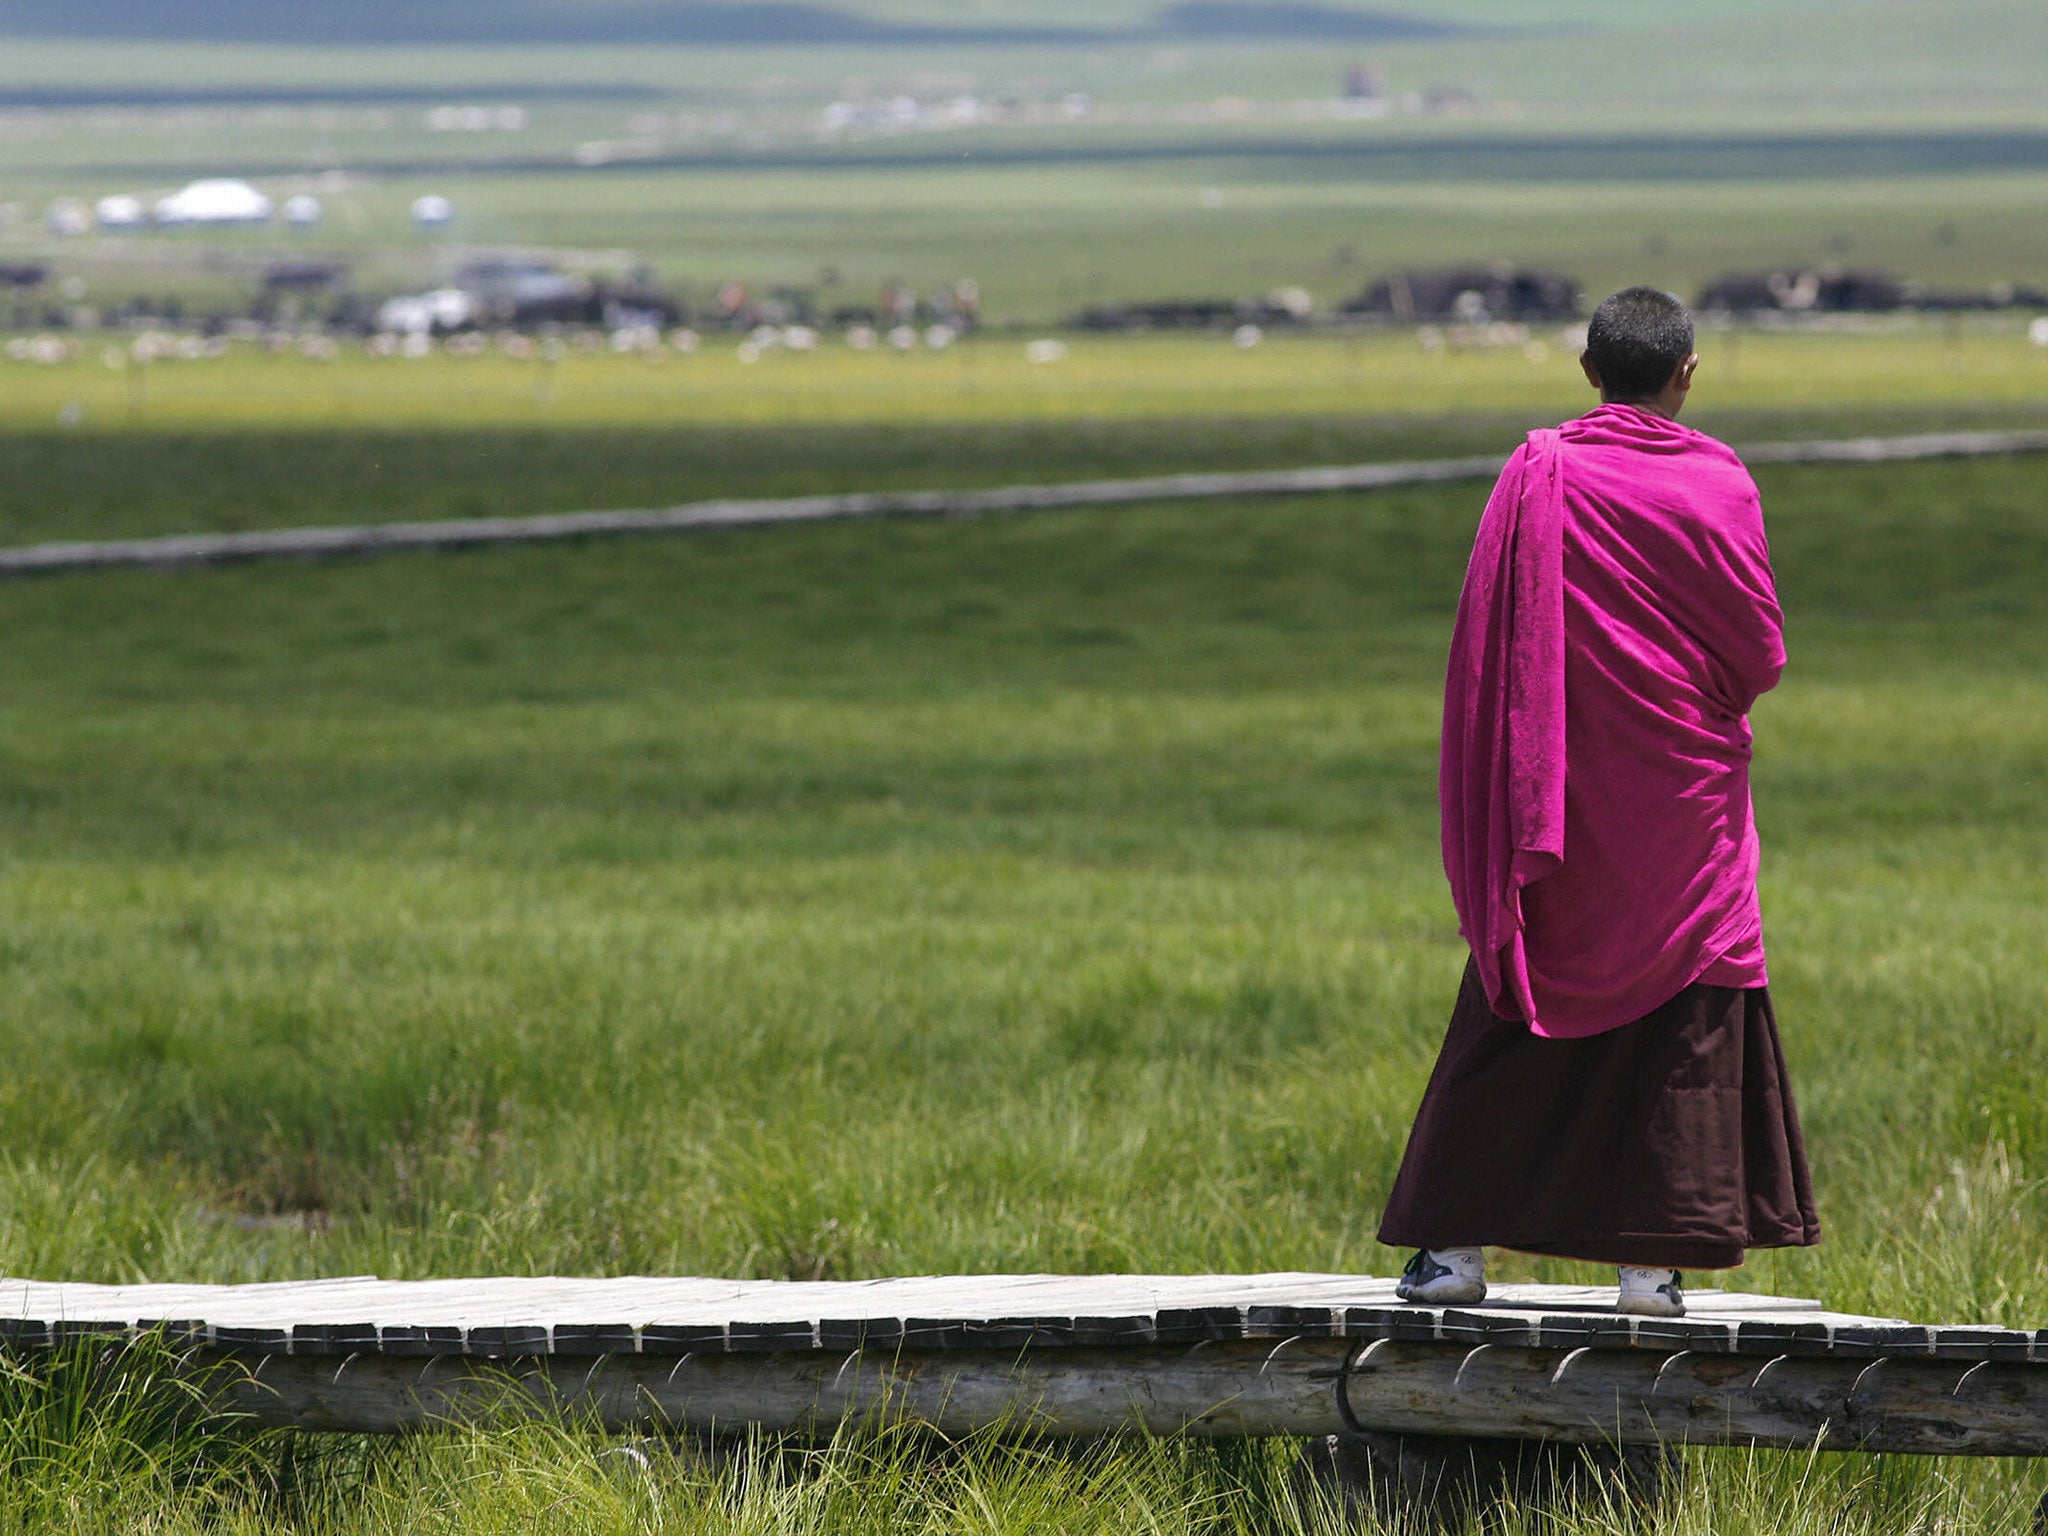 A Tibetan monk surveys the wet Re’er grassland at Meiduo Lake, China. Grassland such as this is helping to balance out the demise of the rainforests